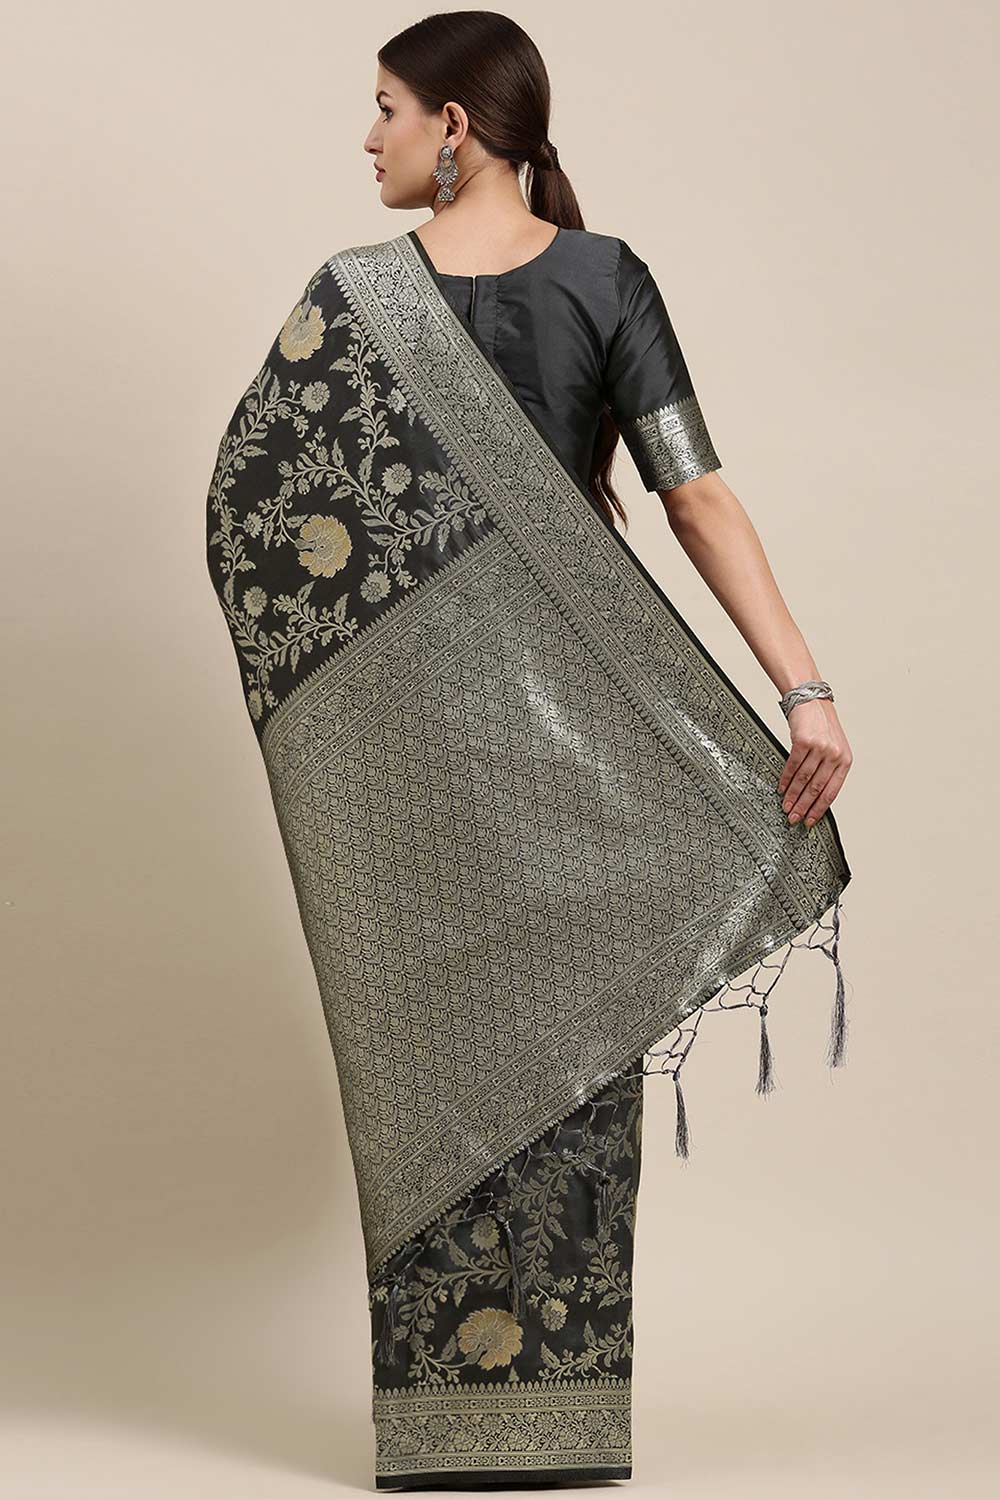 Shop Sangeeta Grey Kanjivaram Silk Floral One Minute Saree at best offer at our  Store - One Minute Saree